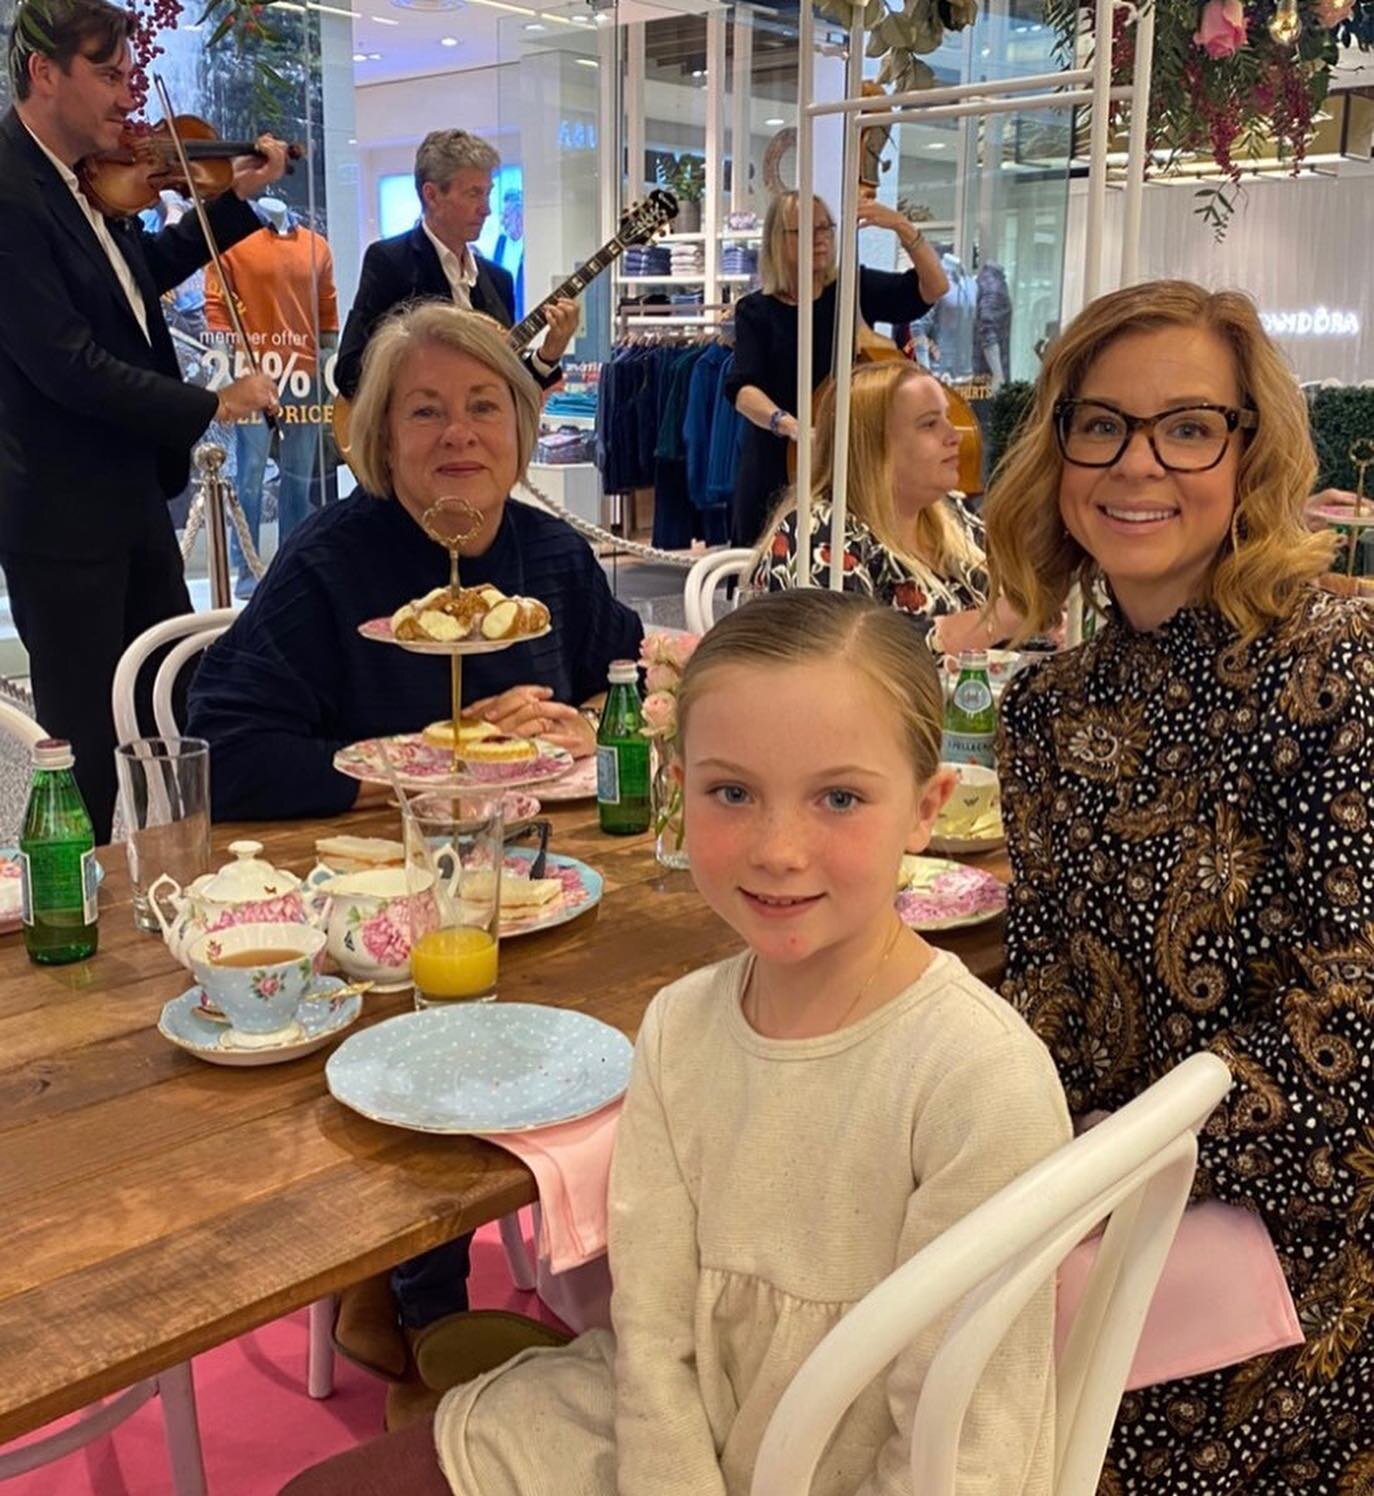 What a magical High Tea Experience at Stockland Shellharbour treating MUM! 💐🍰🧁 #hightea #magicofregprom #regprommarketing #regprom #celebratemum #mothersdayhightea #events #yum